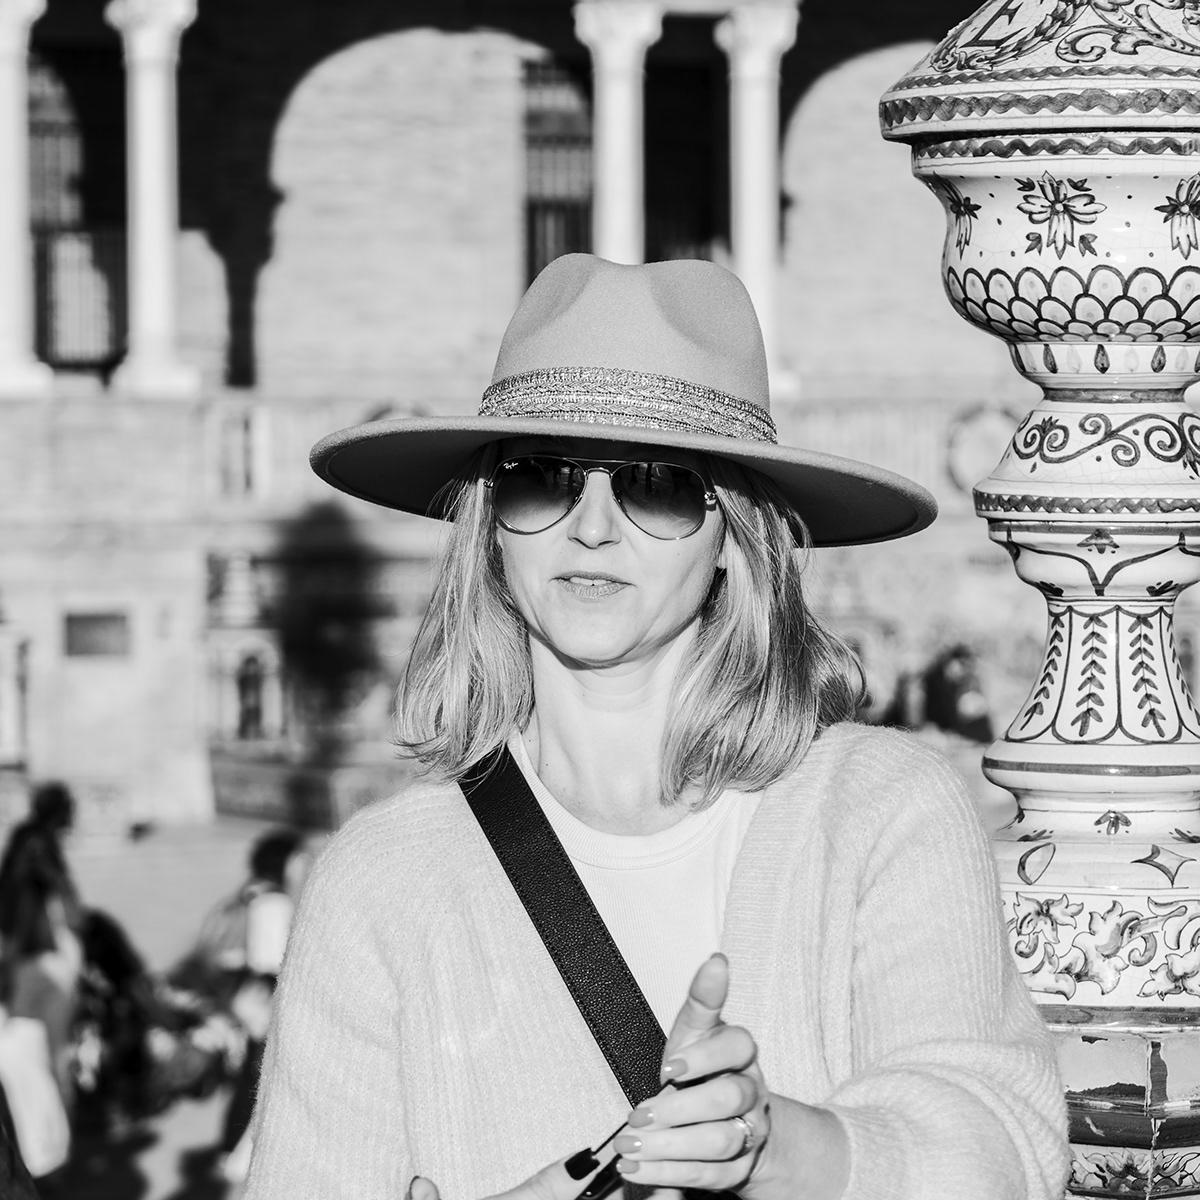 sevilla seville spain street photography black and white monochrome people canon eos r6 Urban candid